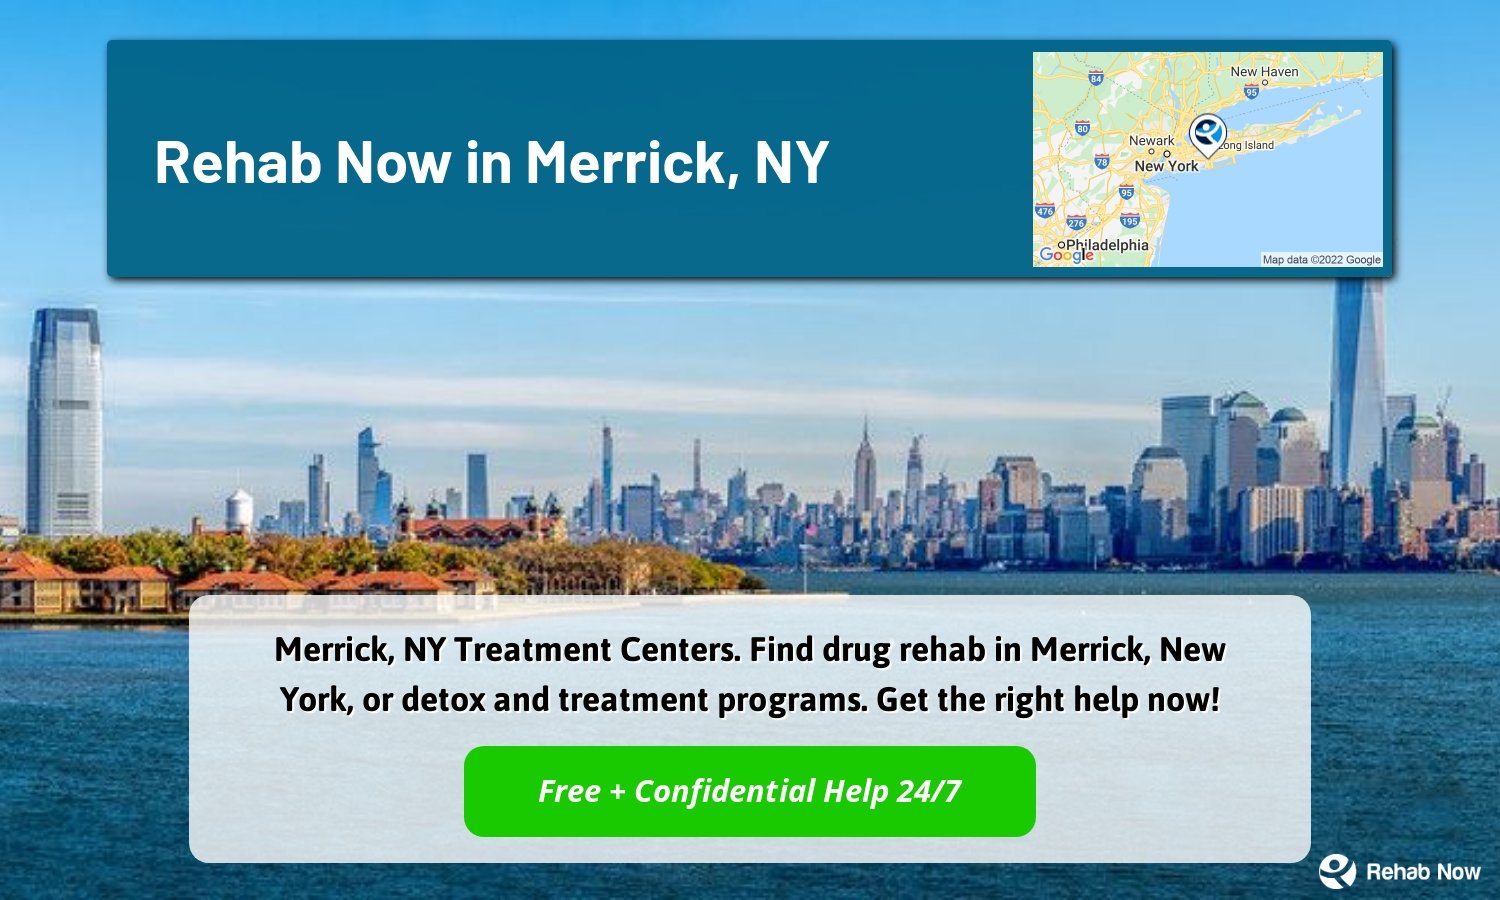 Merrick, NY Treatment Centers. Find drug rehab in Merrick, New York, or detox and treatment programs. Get the right help now!